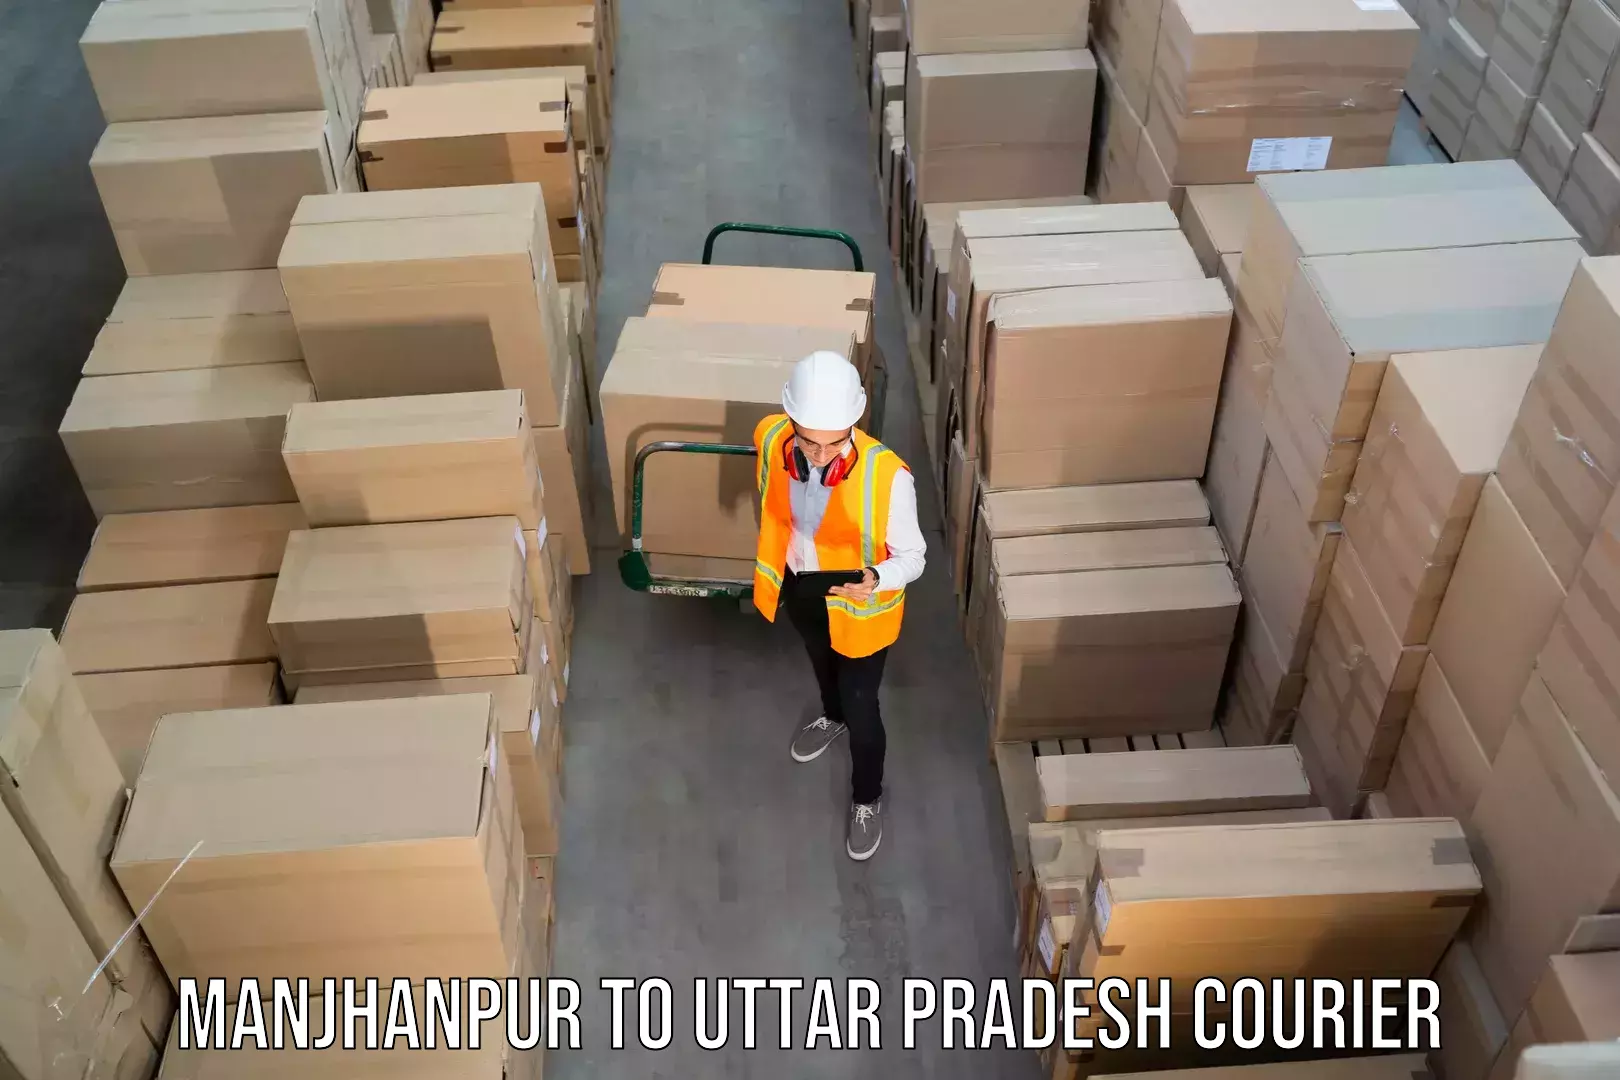 State-of-the-art courier technology Manjhanpur to Agra